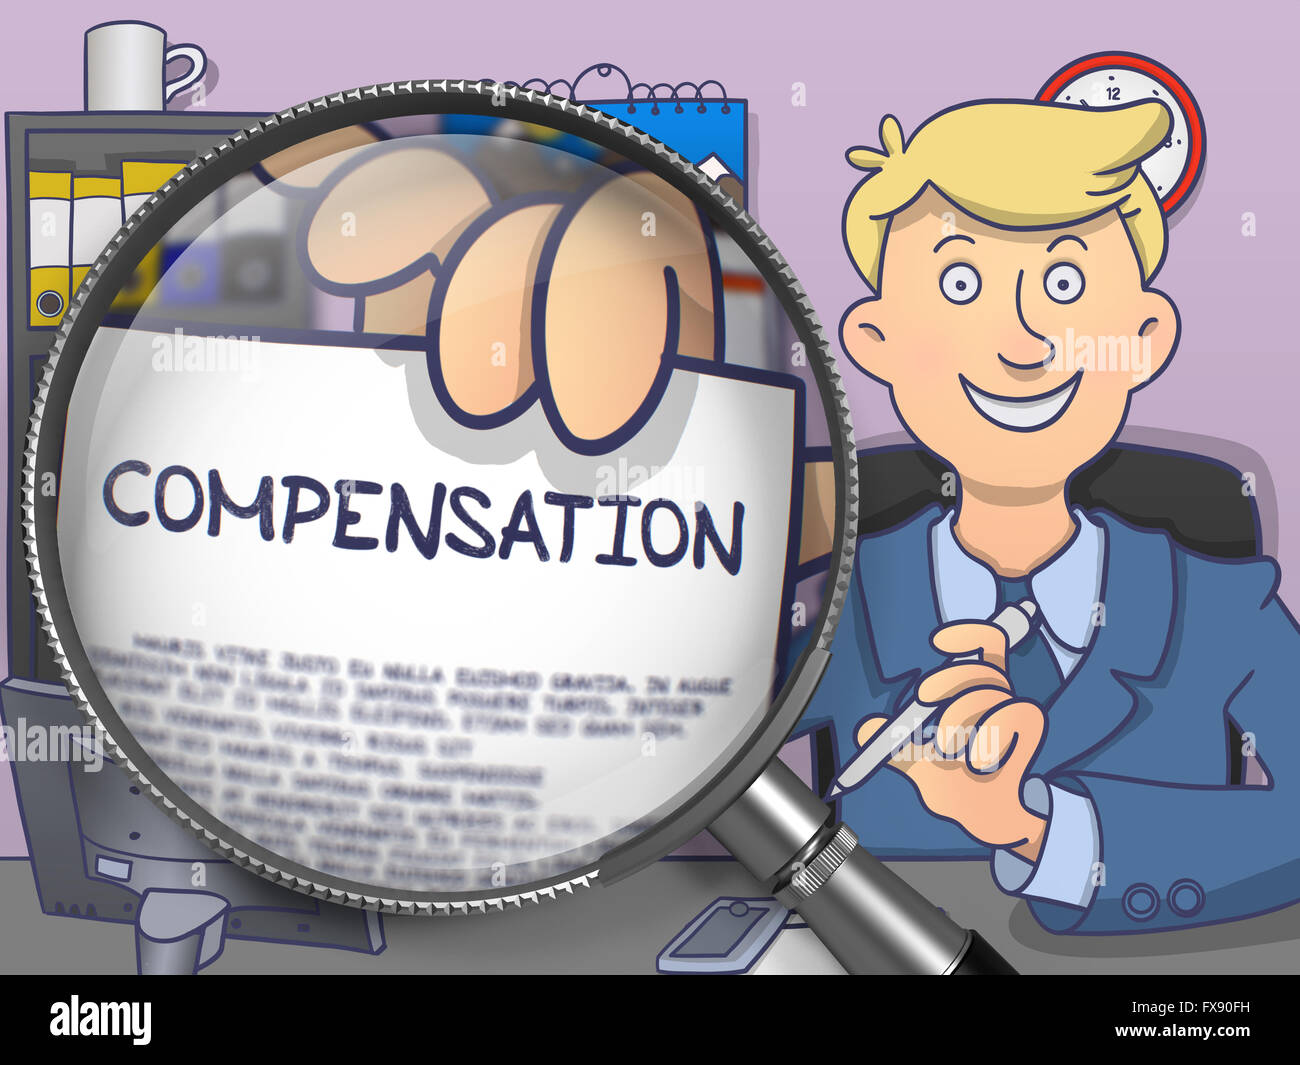 Compensation through Magnifying Glass. Doodle Concept. Stock Photo